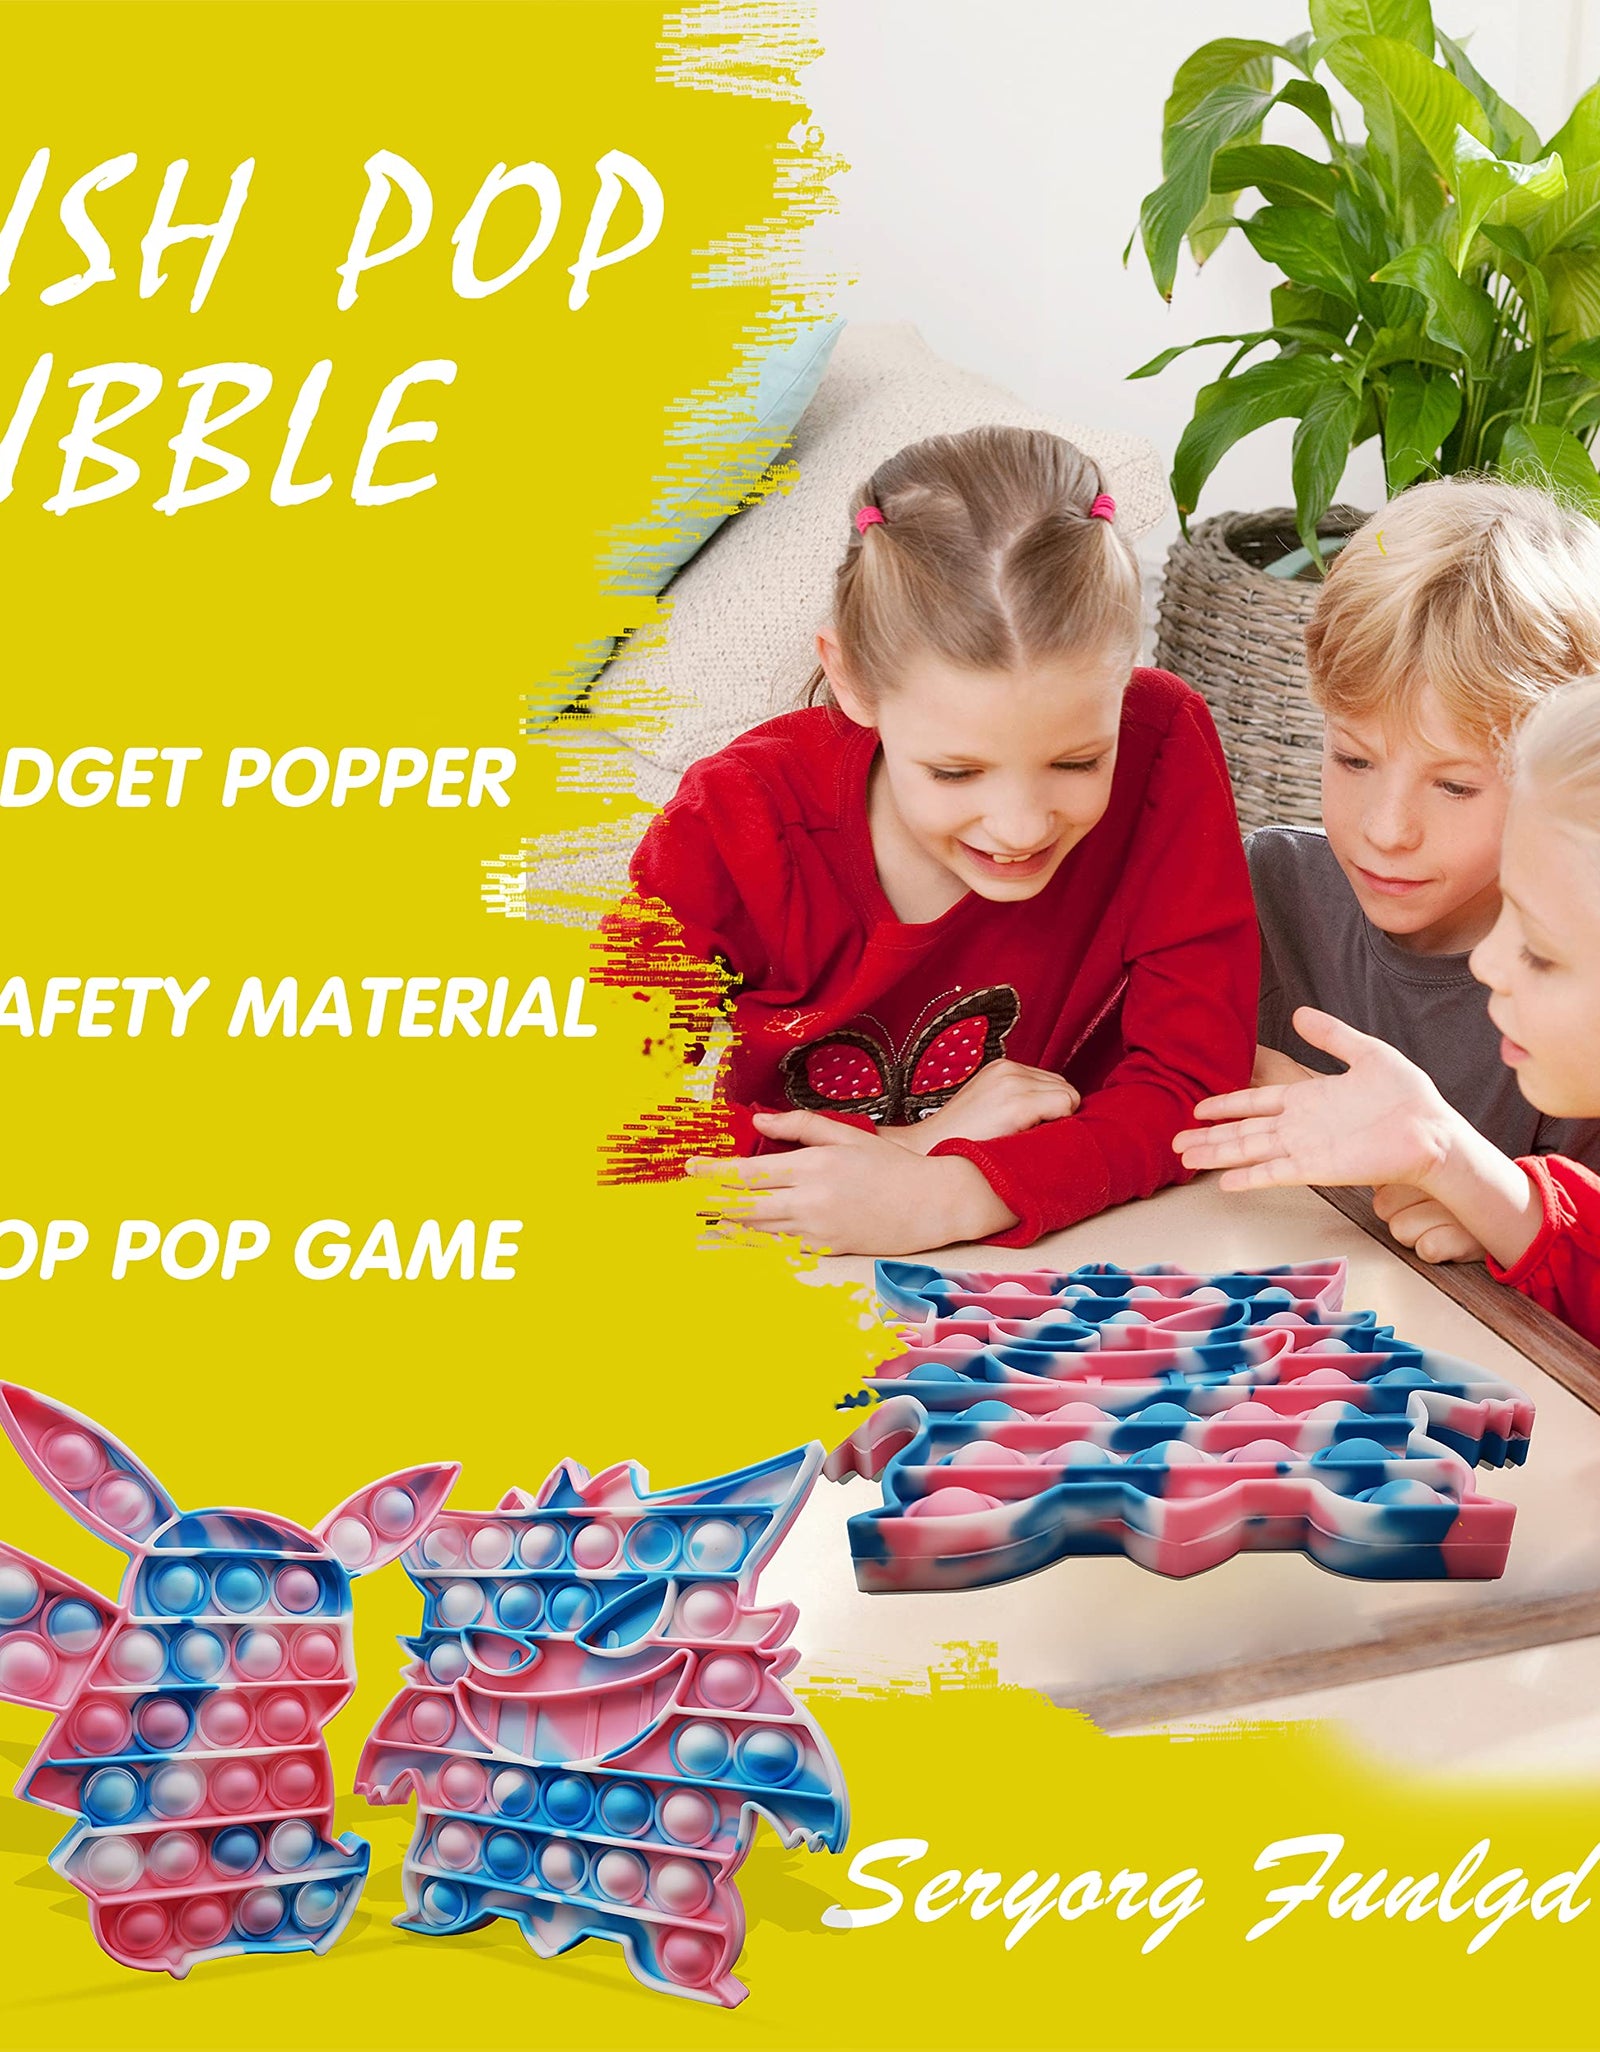 Tie Dye Push Pop Pop Fidget Sensory Toy, Popper Fidget Toy That Suitable for ADHD and Early Educational Toddler Baby, Mega Pop Fidgets for Girls and Kids (PKQ-Yellow)